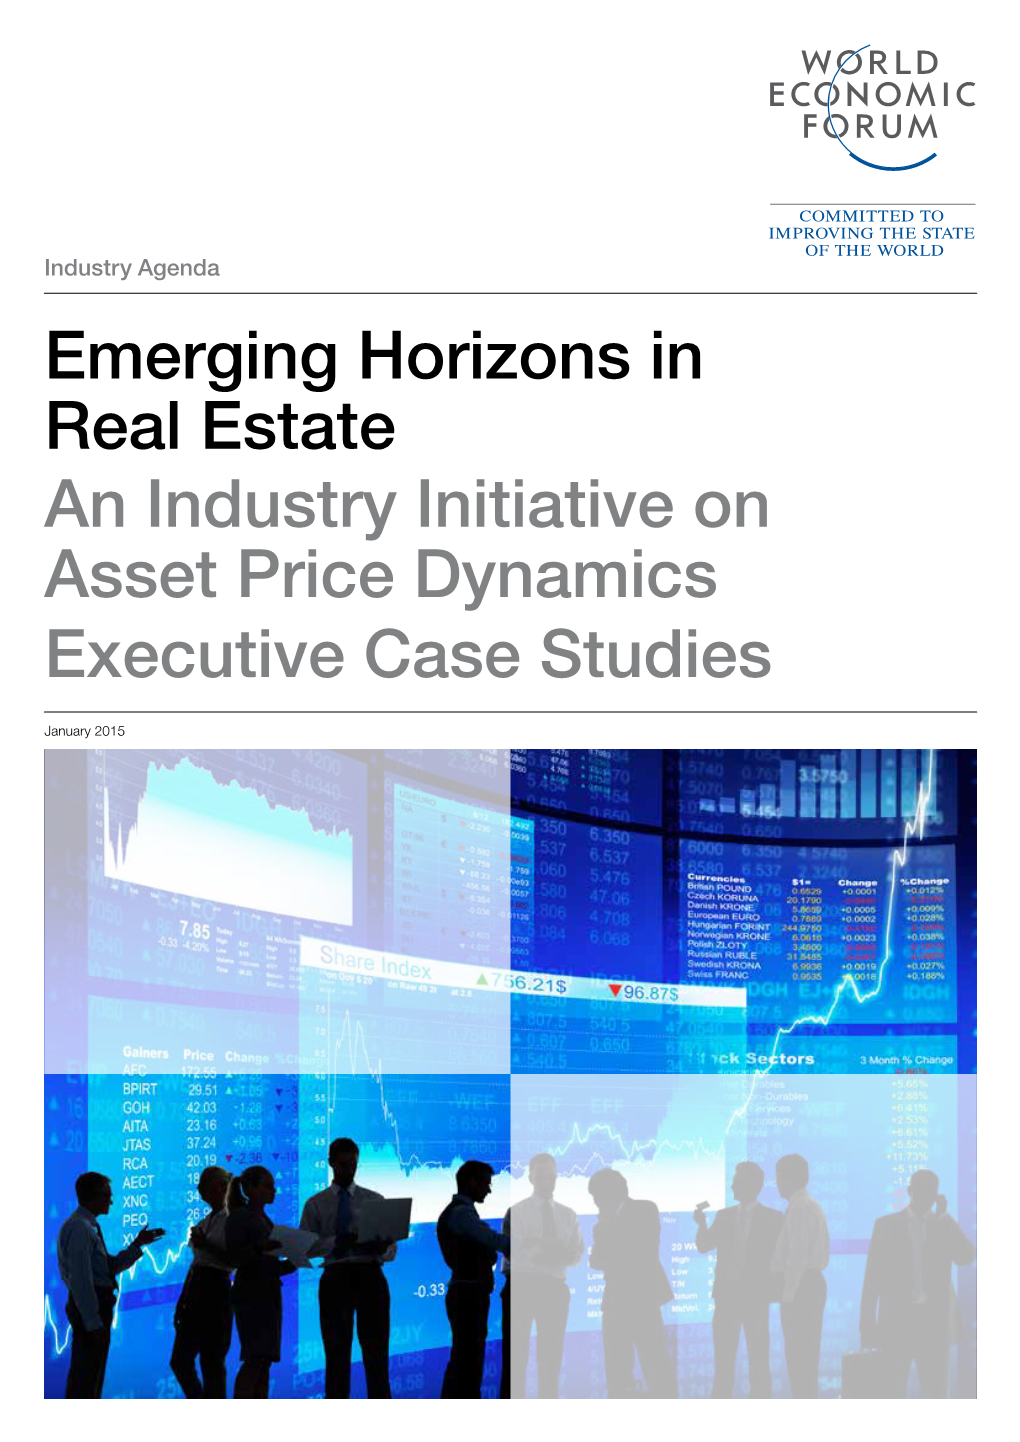 An Industry Initiative on Asset Price Dynamics Executive Case Studies